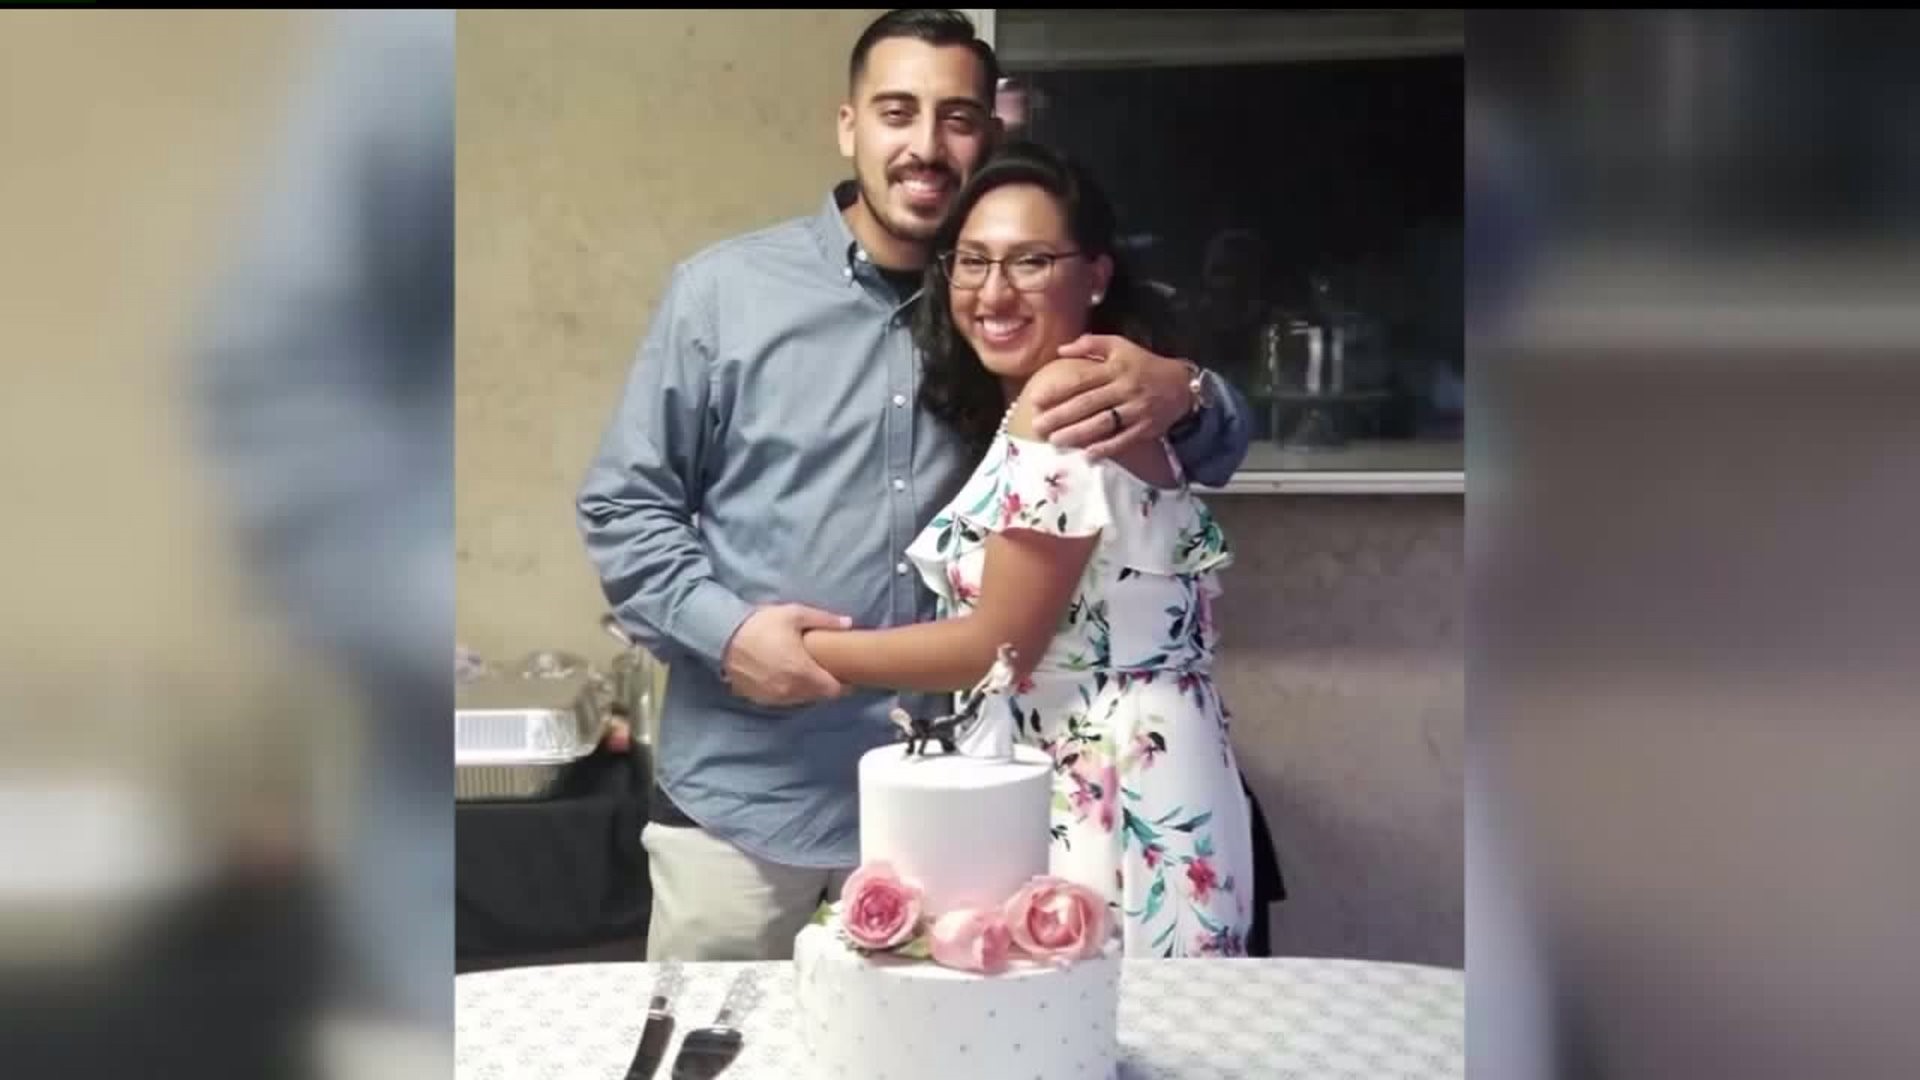 Brothers accused of killing California newlywed at his wedding reception